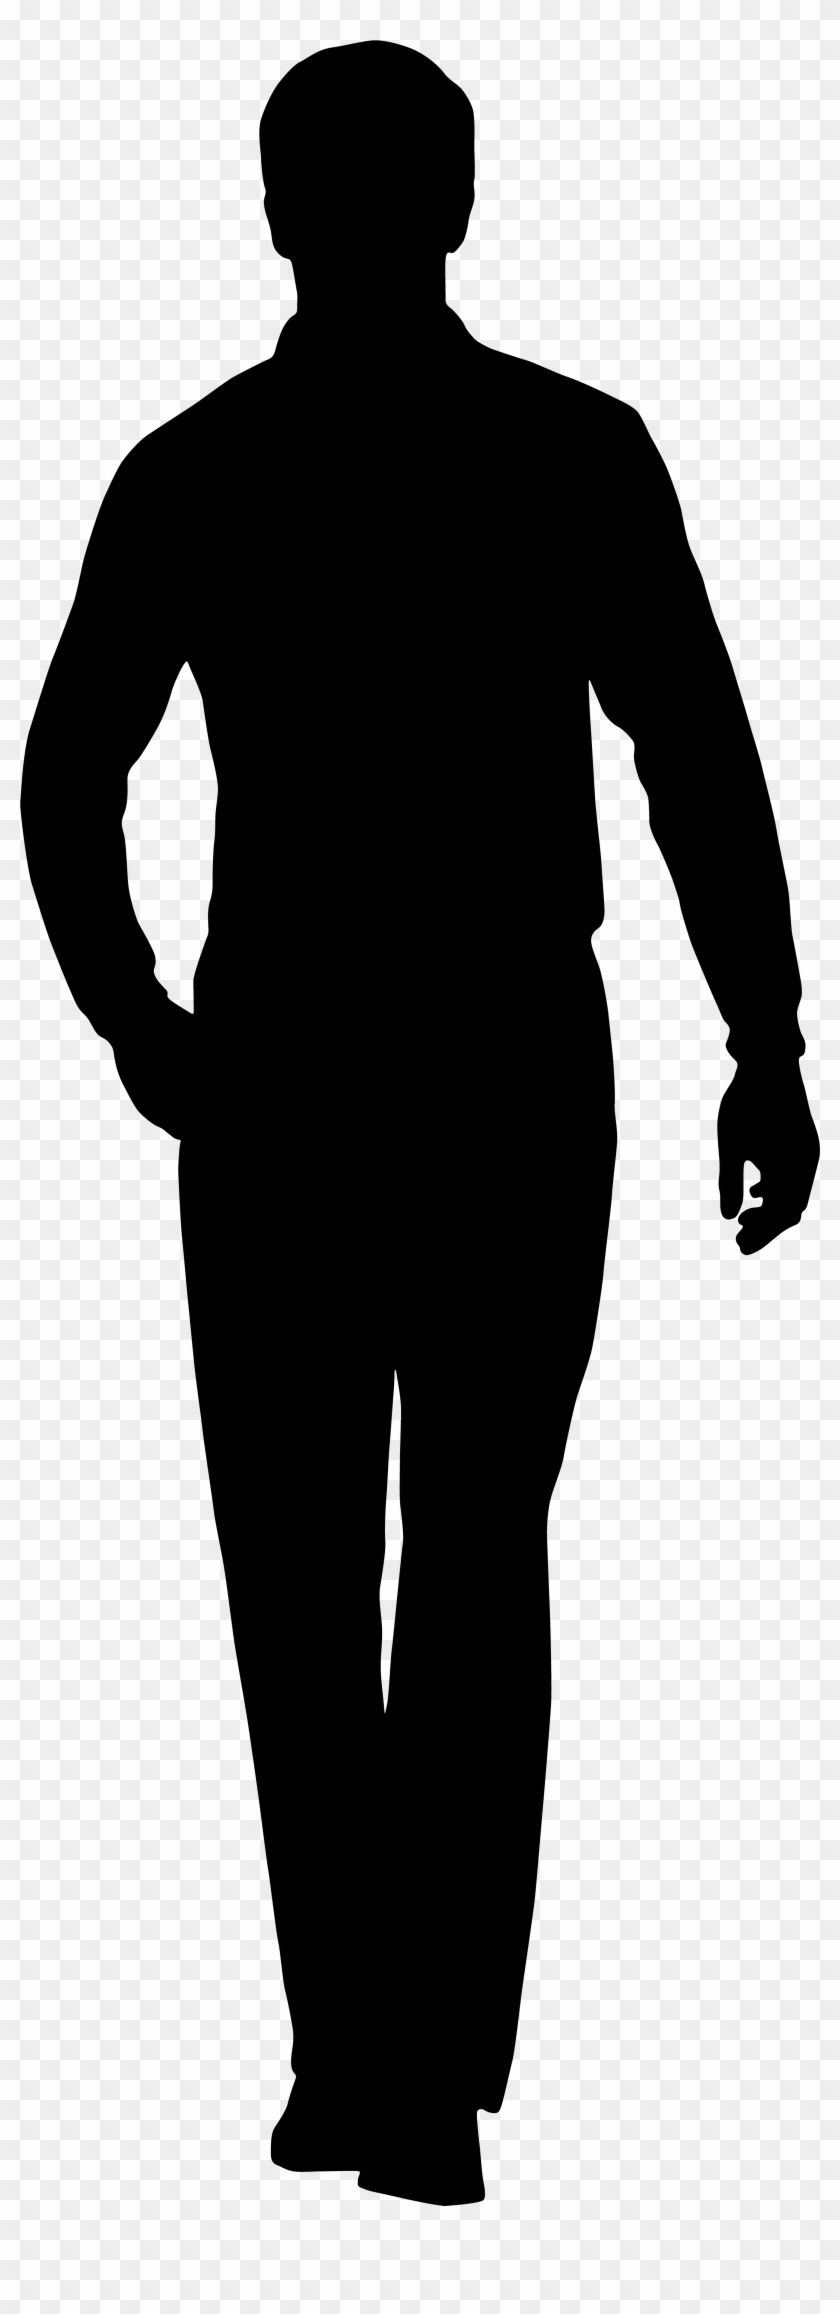 Male Silhouette Png Clip Artu200b Gallery Yopriceville - Male ...